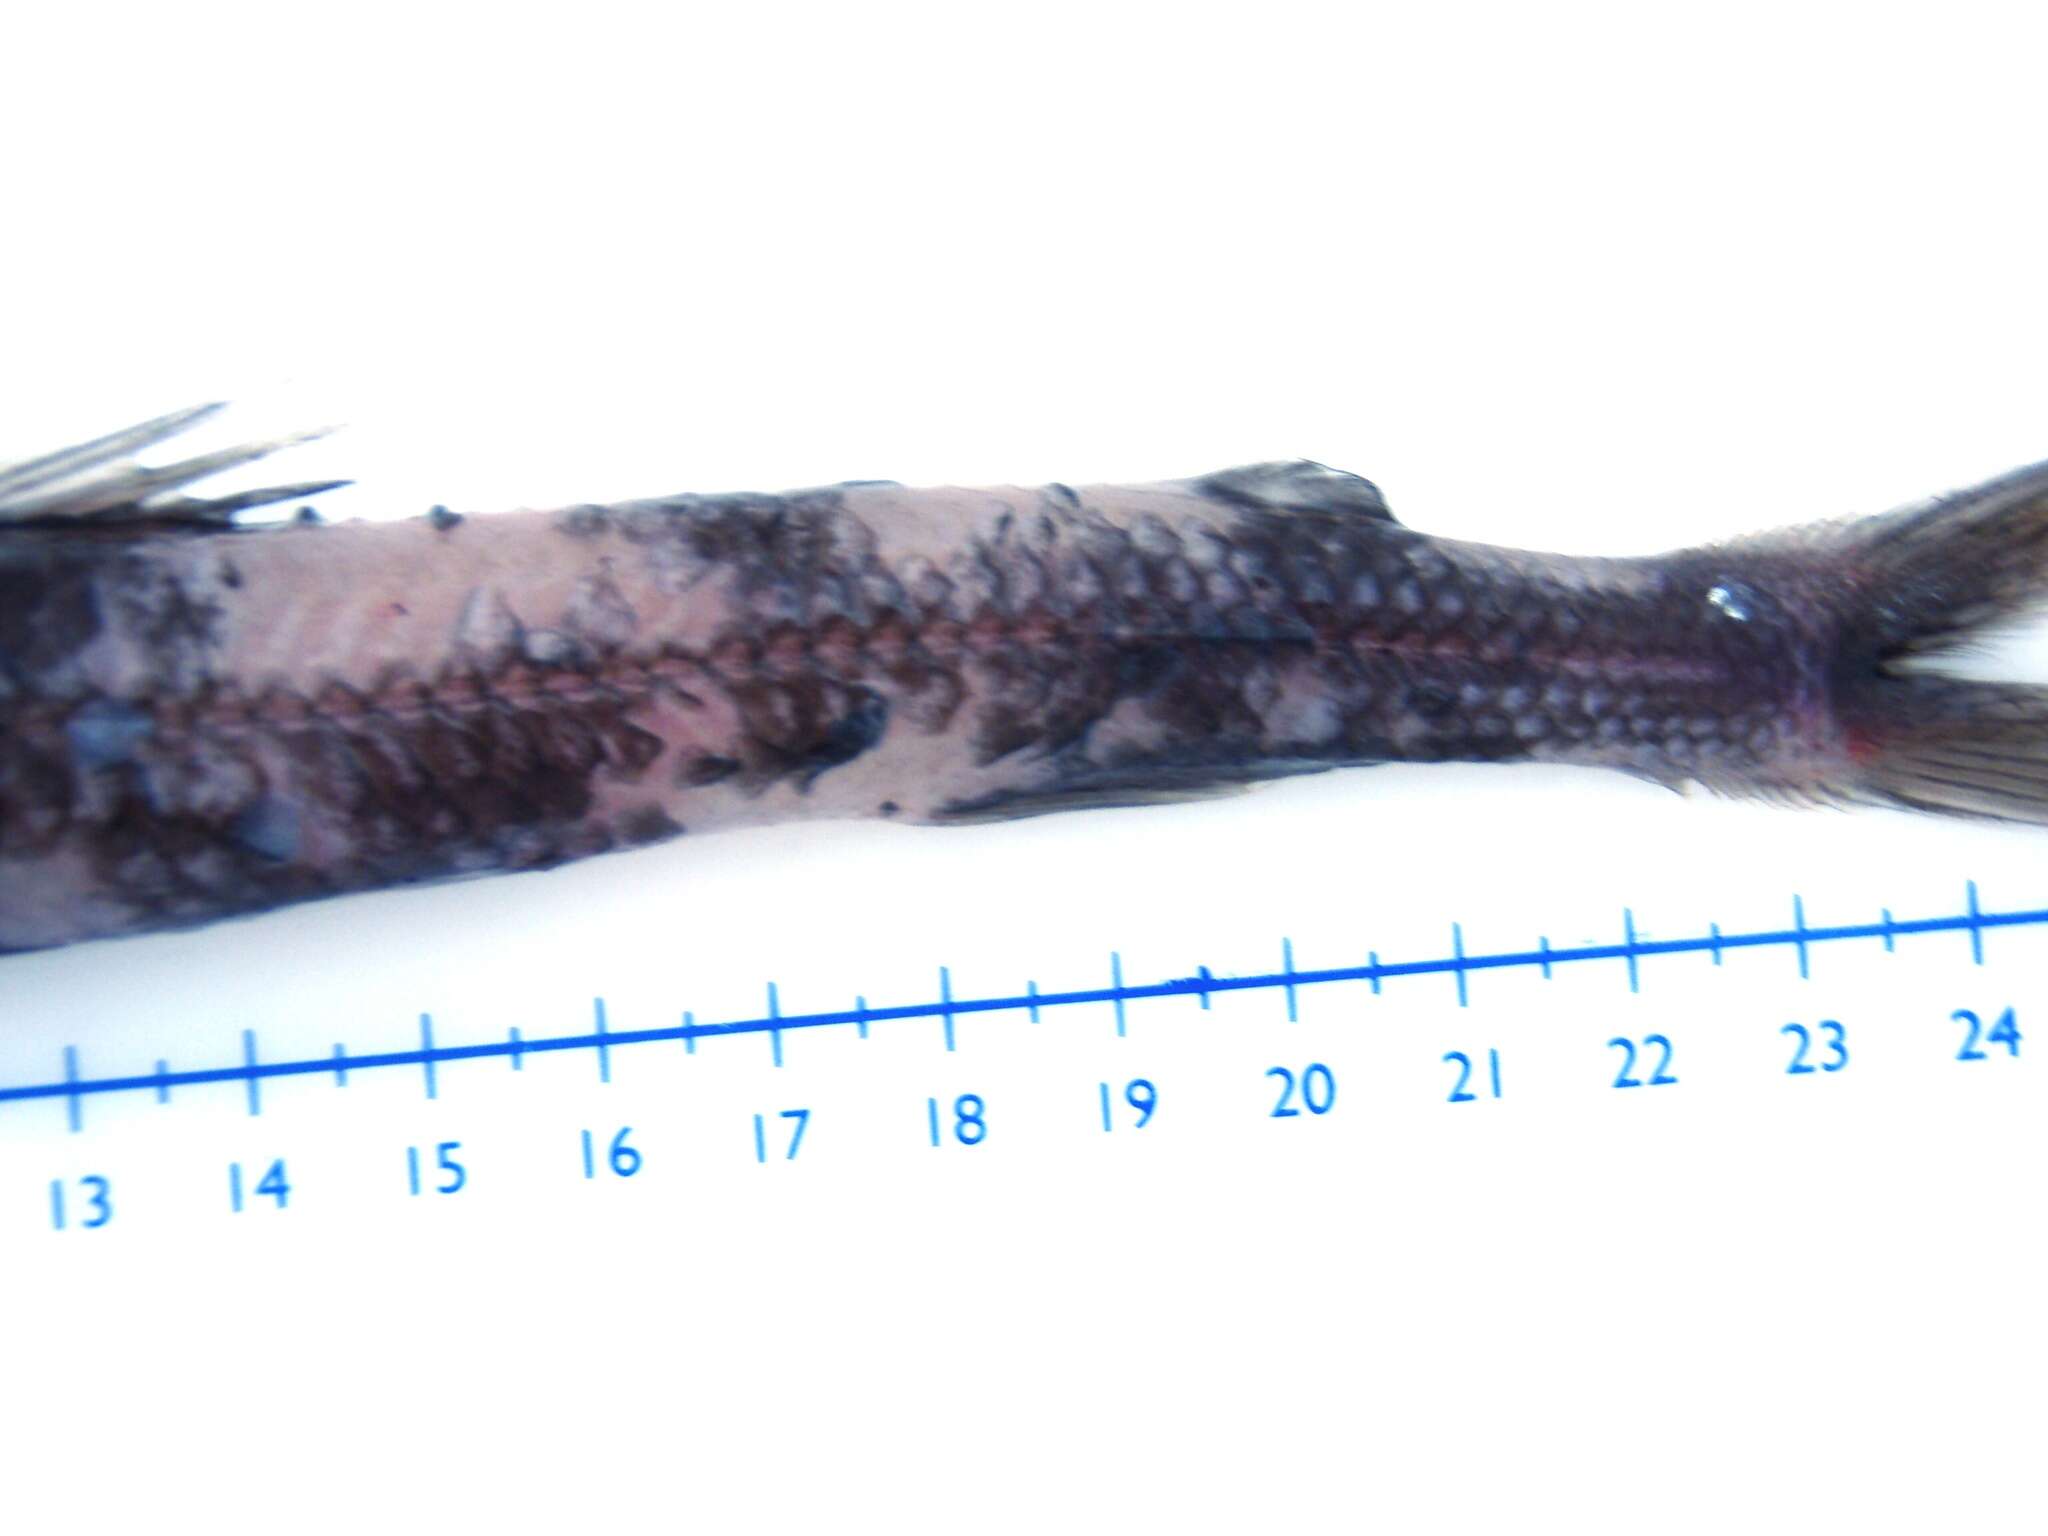 Image of waryfishes